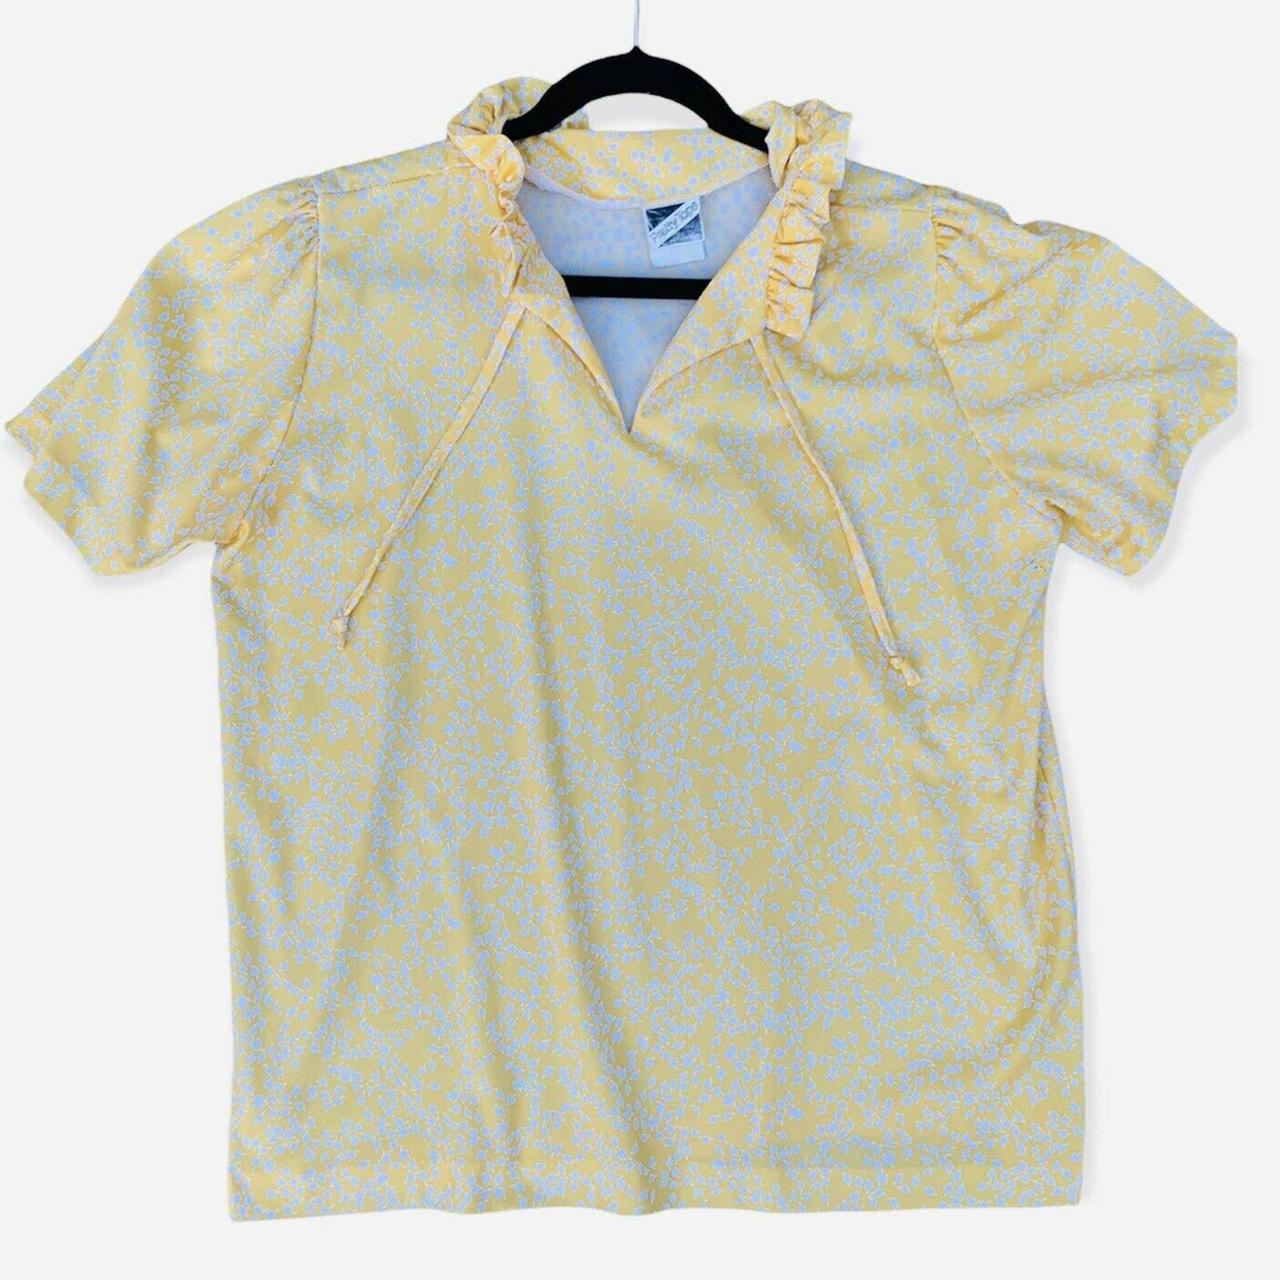 Product Image 2 - Vintage Yellow top with white